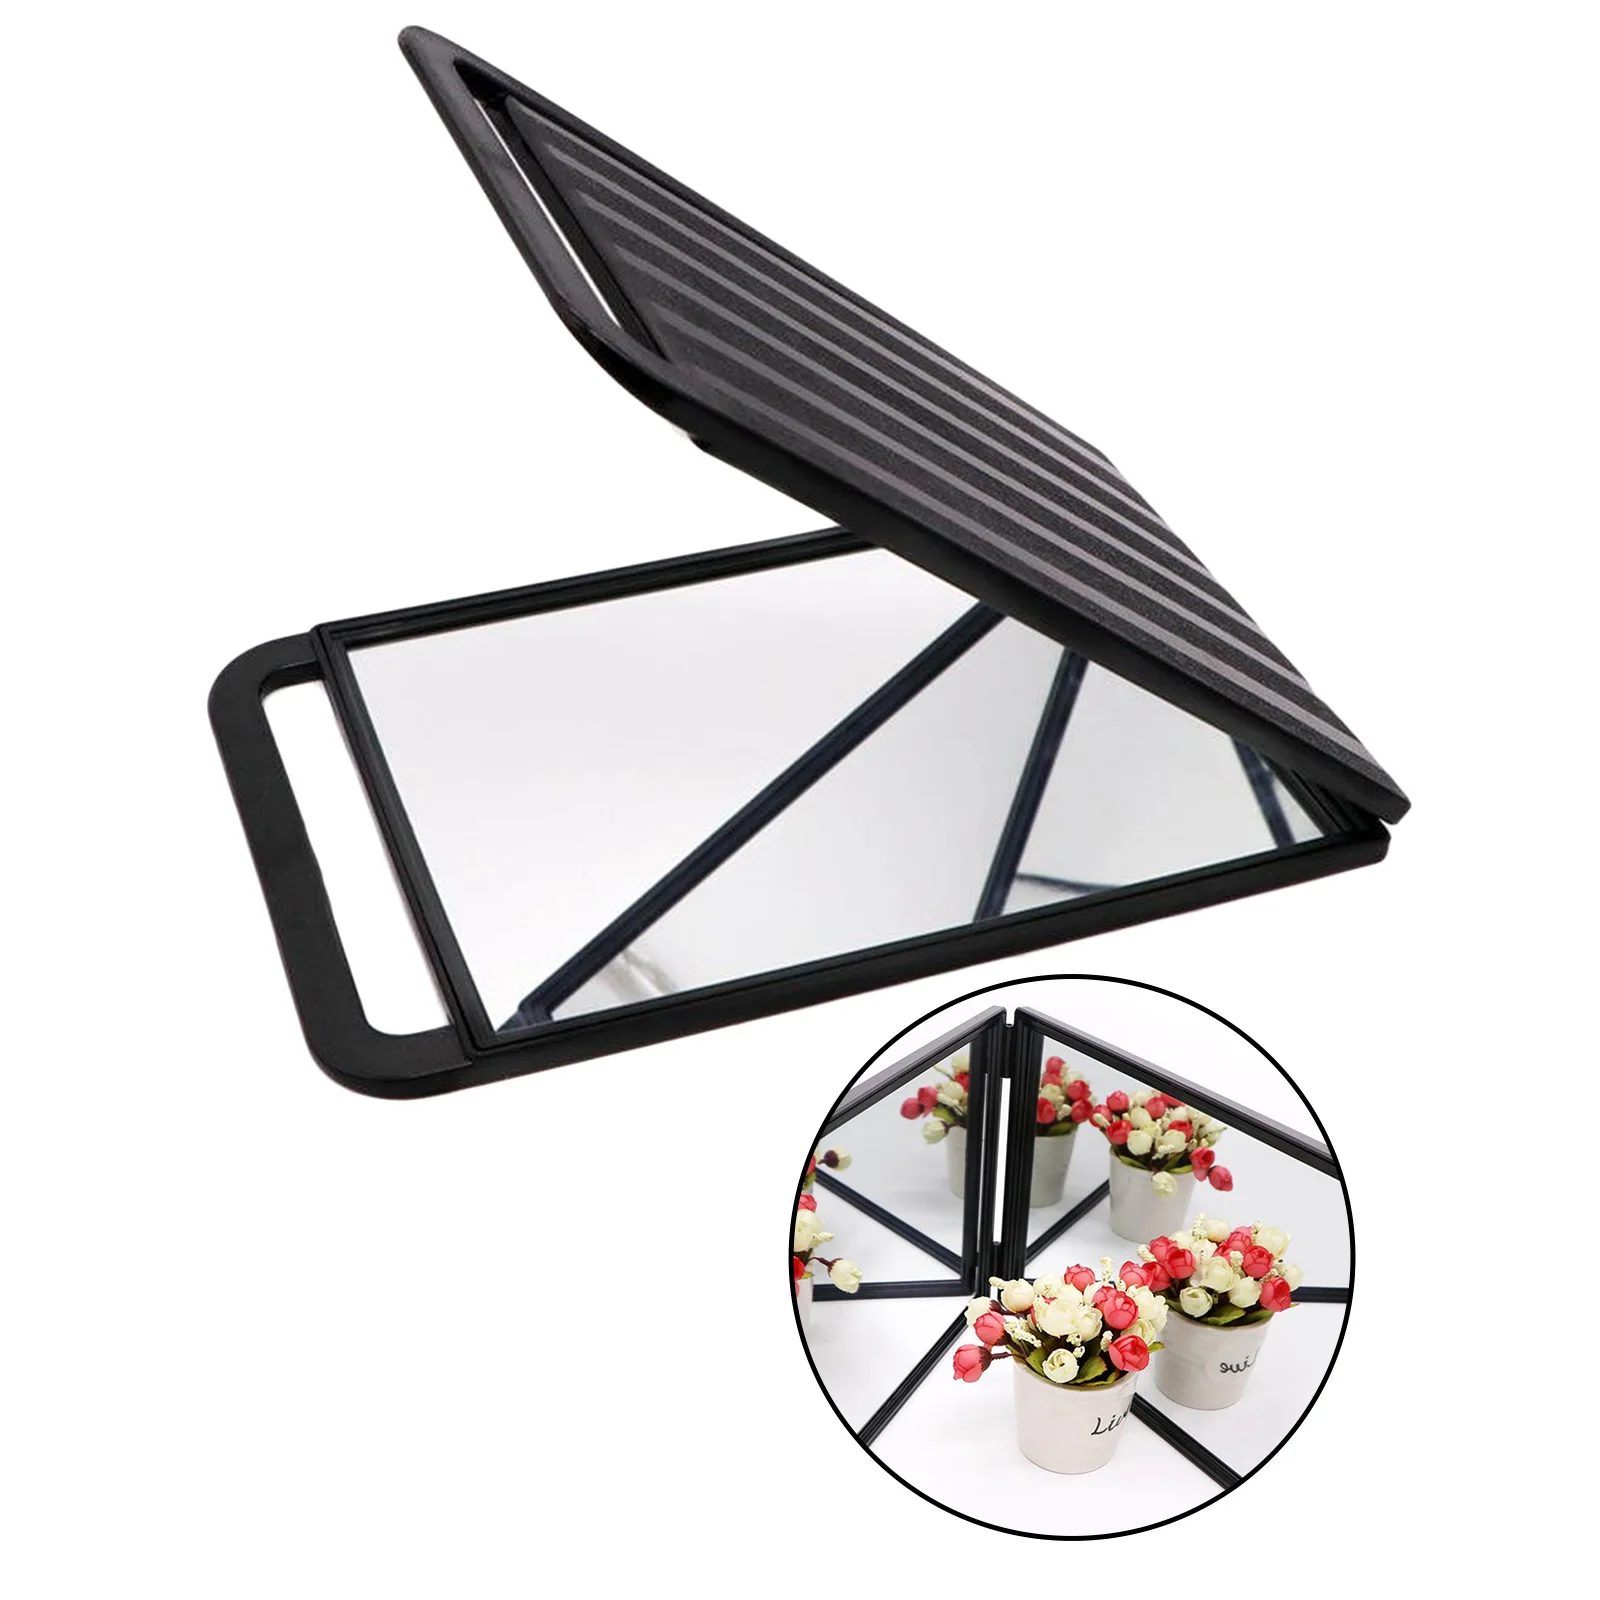 Foldable Double Sided Hand Held Mirror for Barber Lady Makeup Beauty Cosmetic